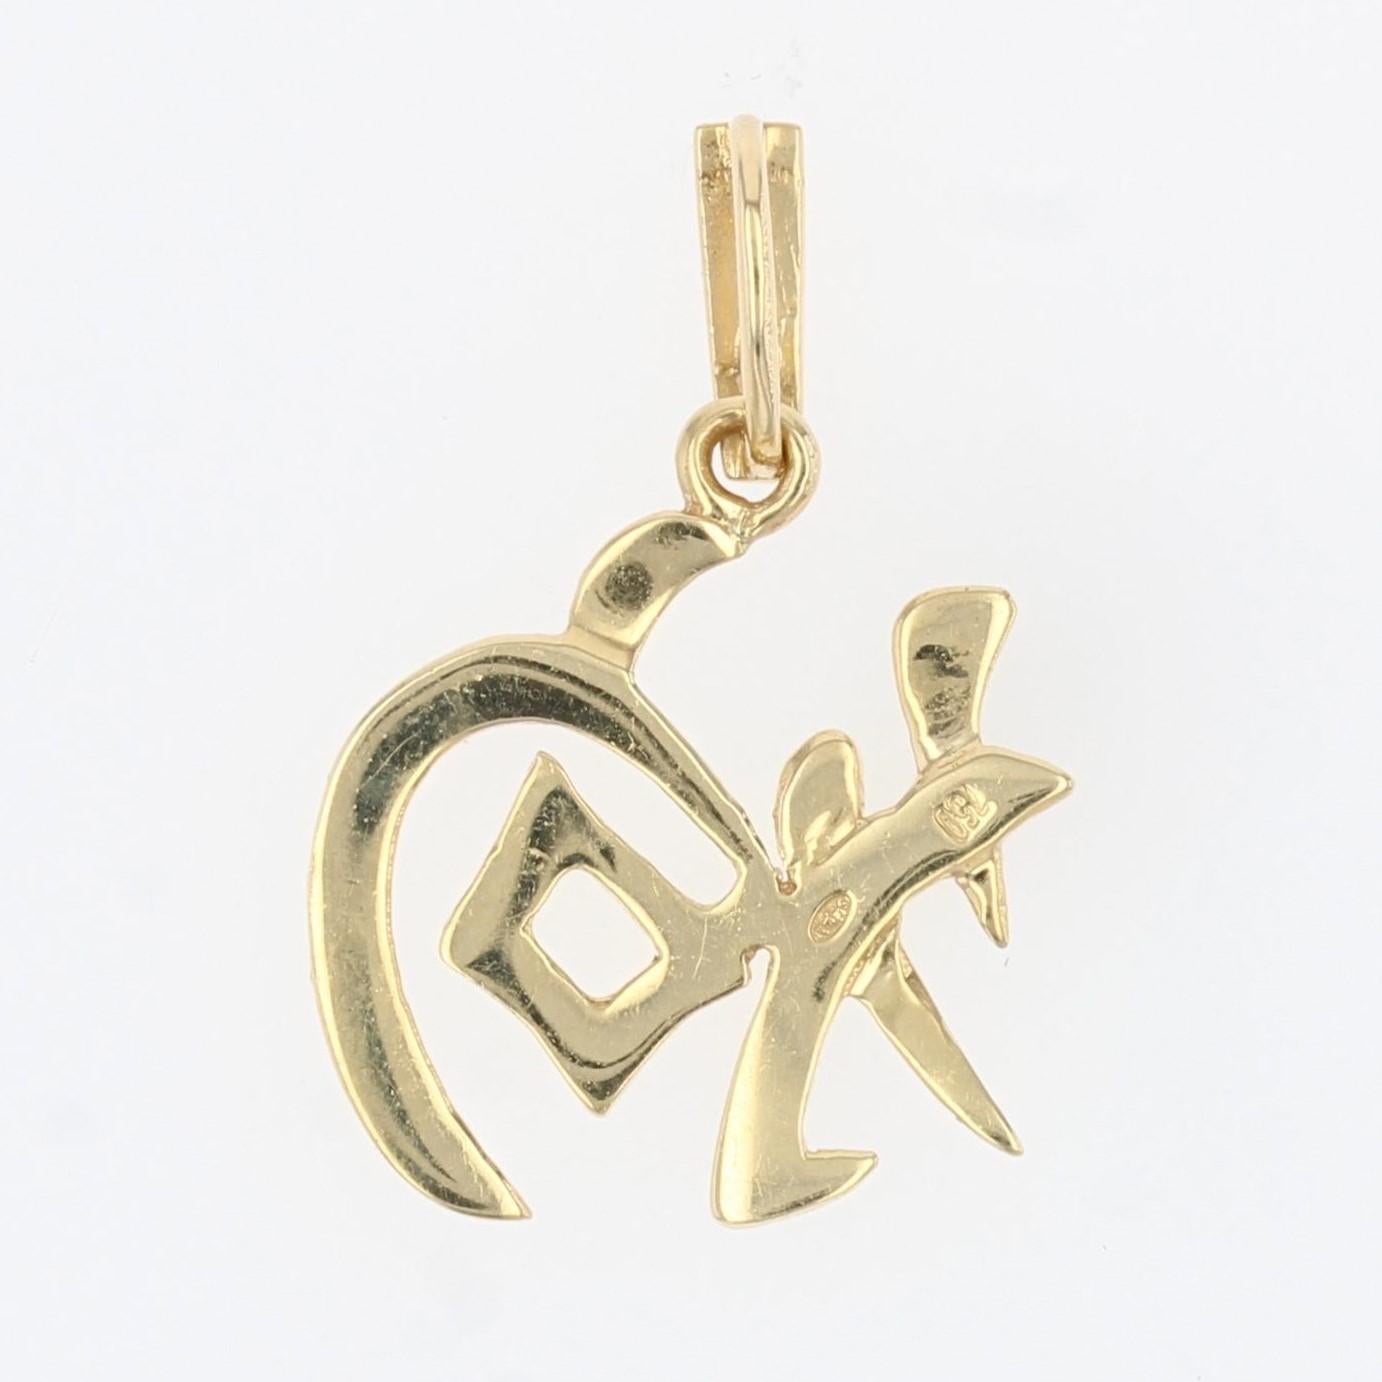 Pendant in 18 karat yellow gold.
This retro pendant represents an Asian character in smooth and chiseled gold.
Pendant sold only without its chain of presentation.
Height : 2,2 cm, width : 15,7 mm, thickness : 1 mm approximately.
Total weight of the